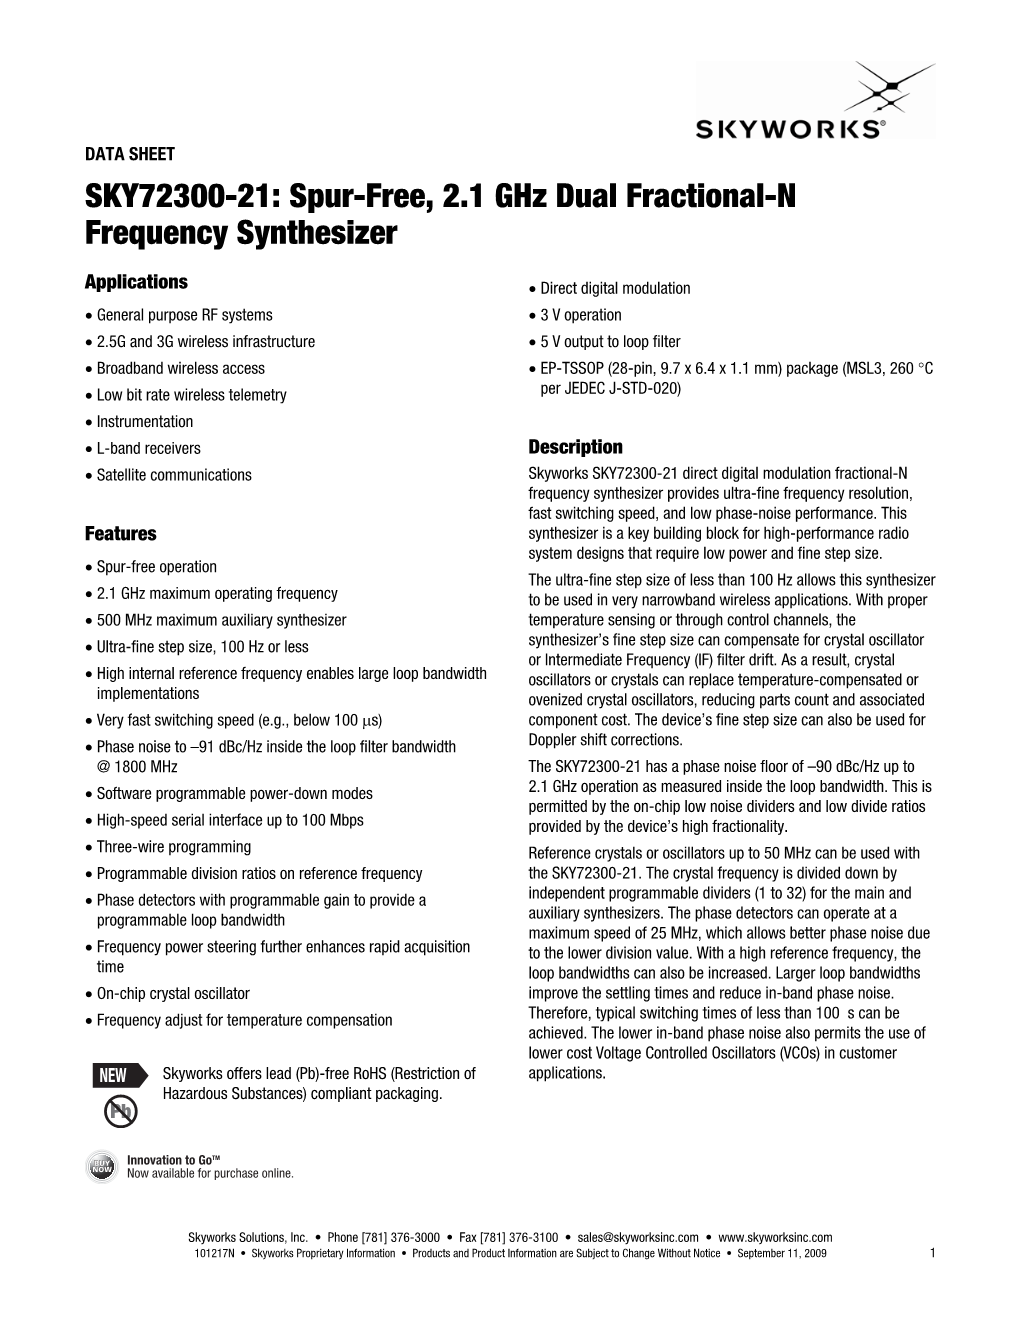 Spur-Free, 2.1 Ghz Dual Fractional-N Frequency Synthesizer